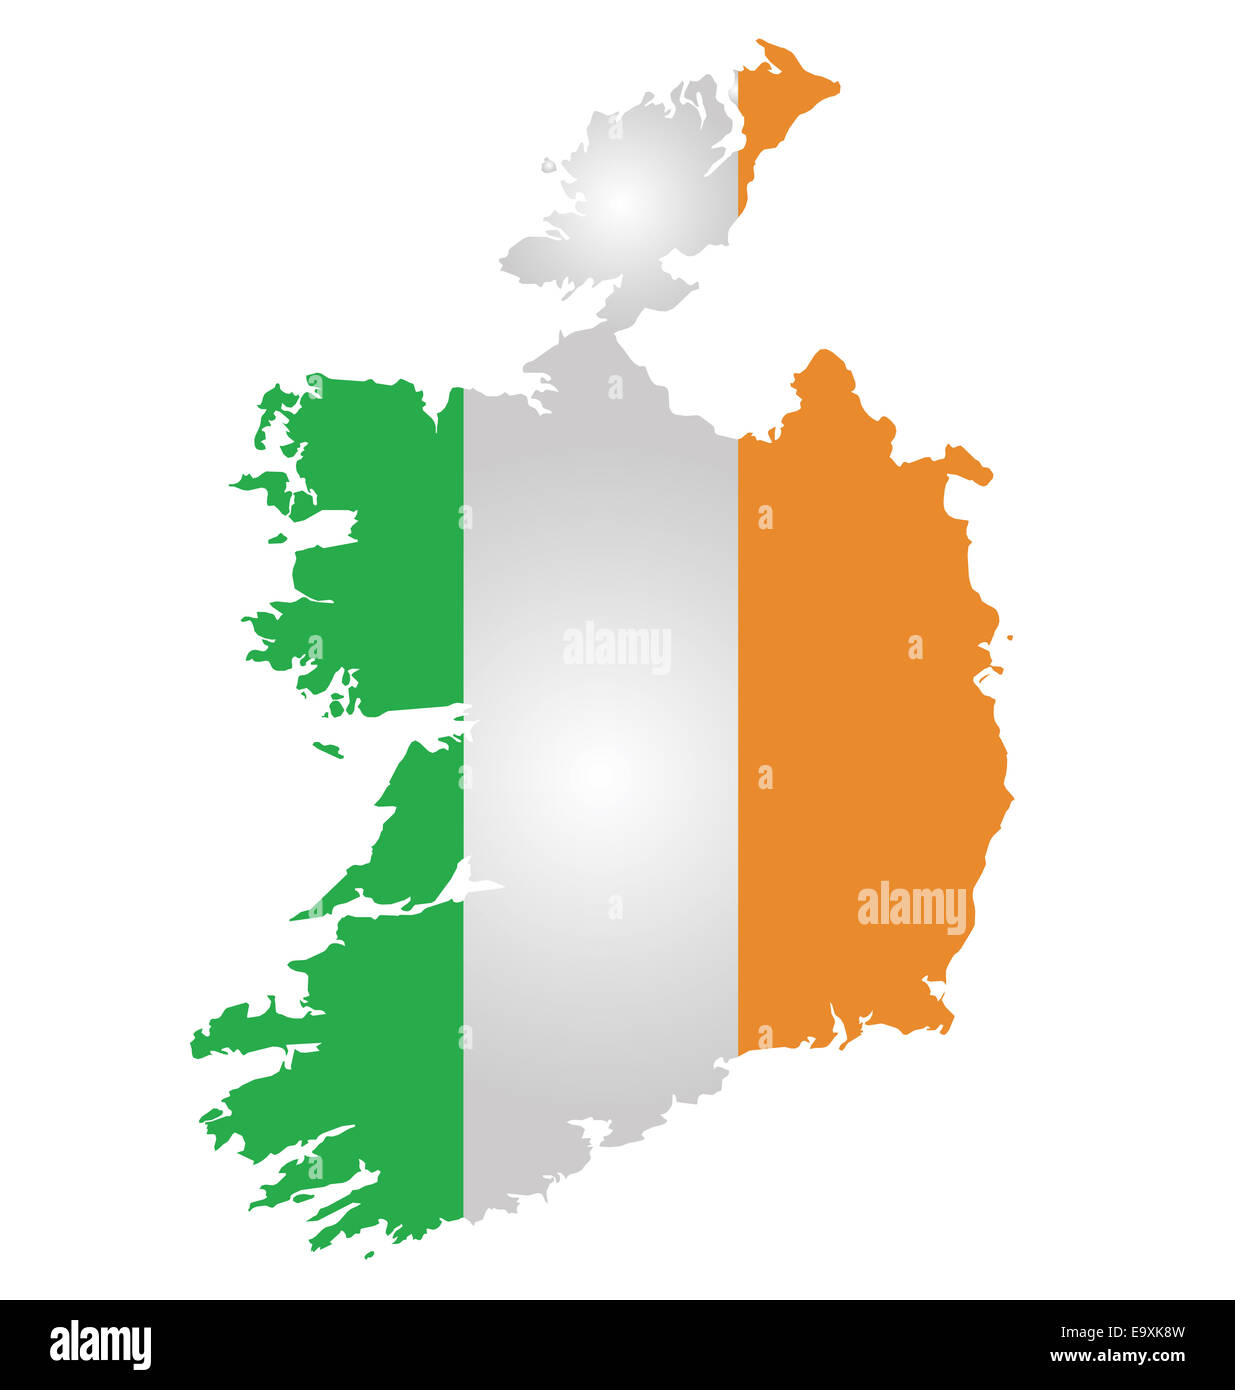 Flag of the Republic of Ireland overlaid on detailed outline map Stock Photo